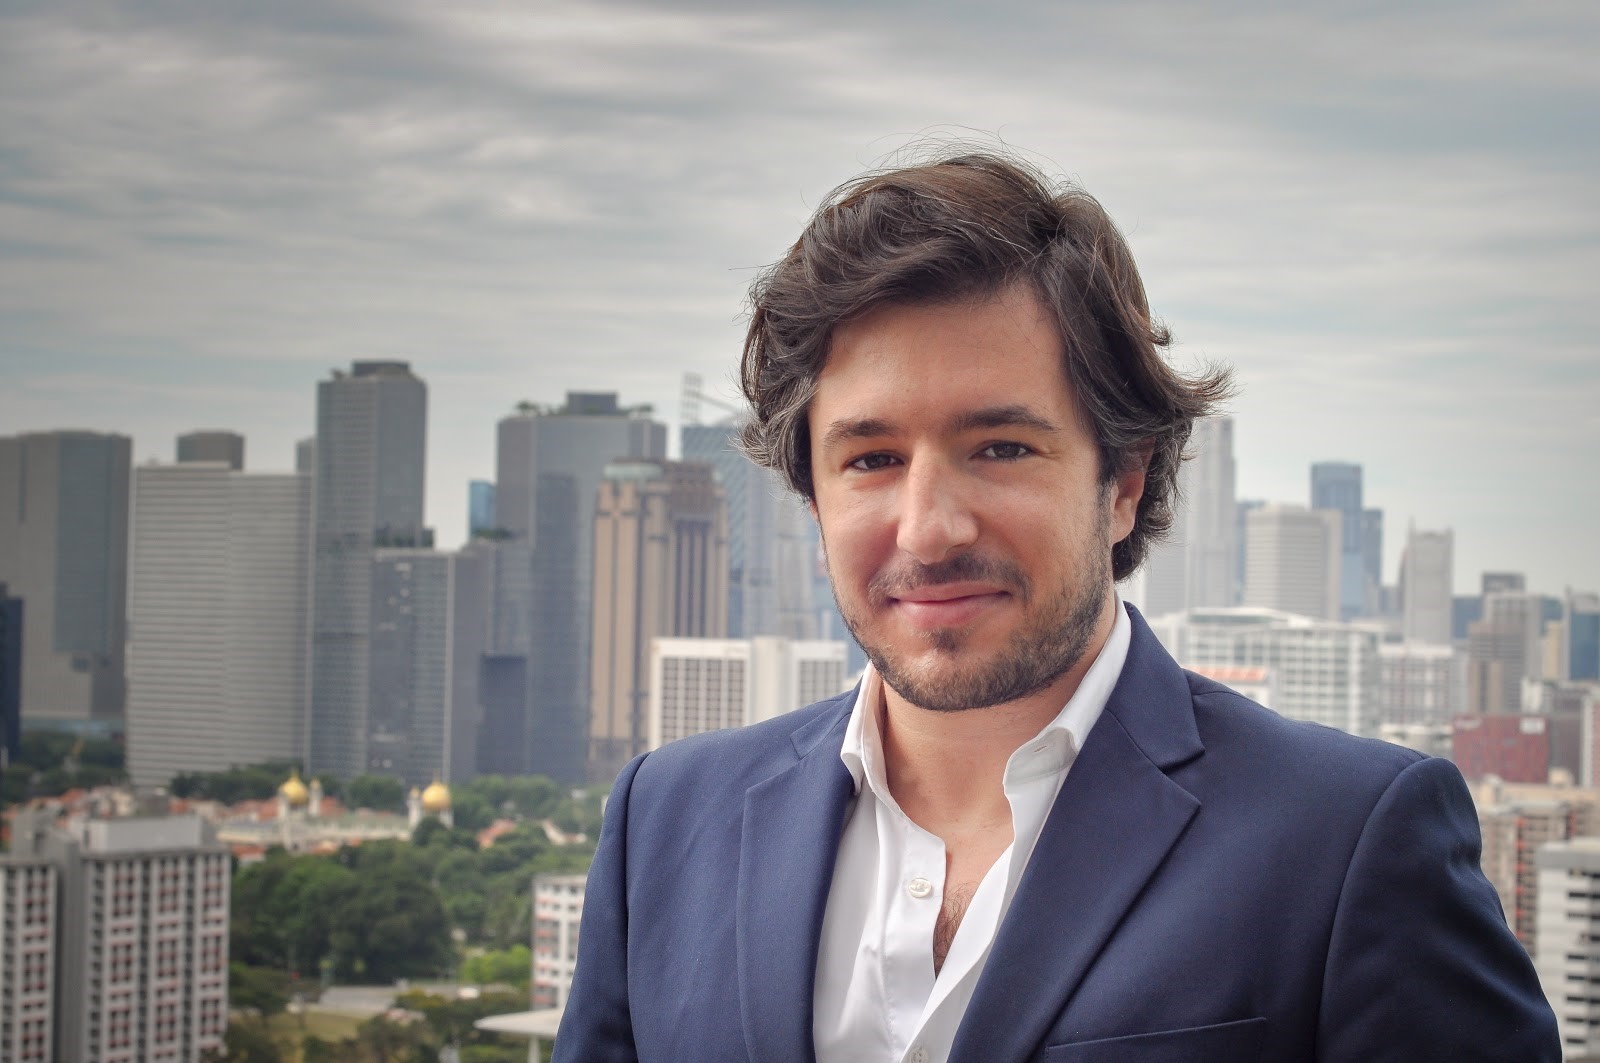 ‘You make progress with experience’: Q&A with Propseller founder & CEO Adrien Jorge